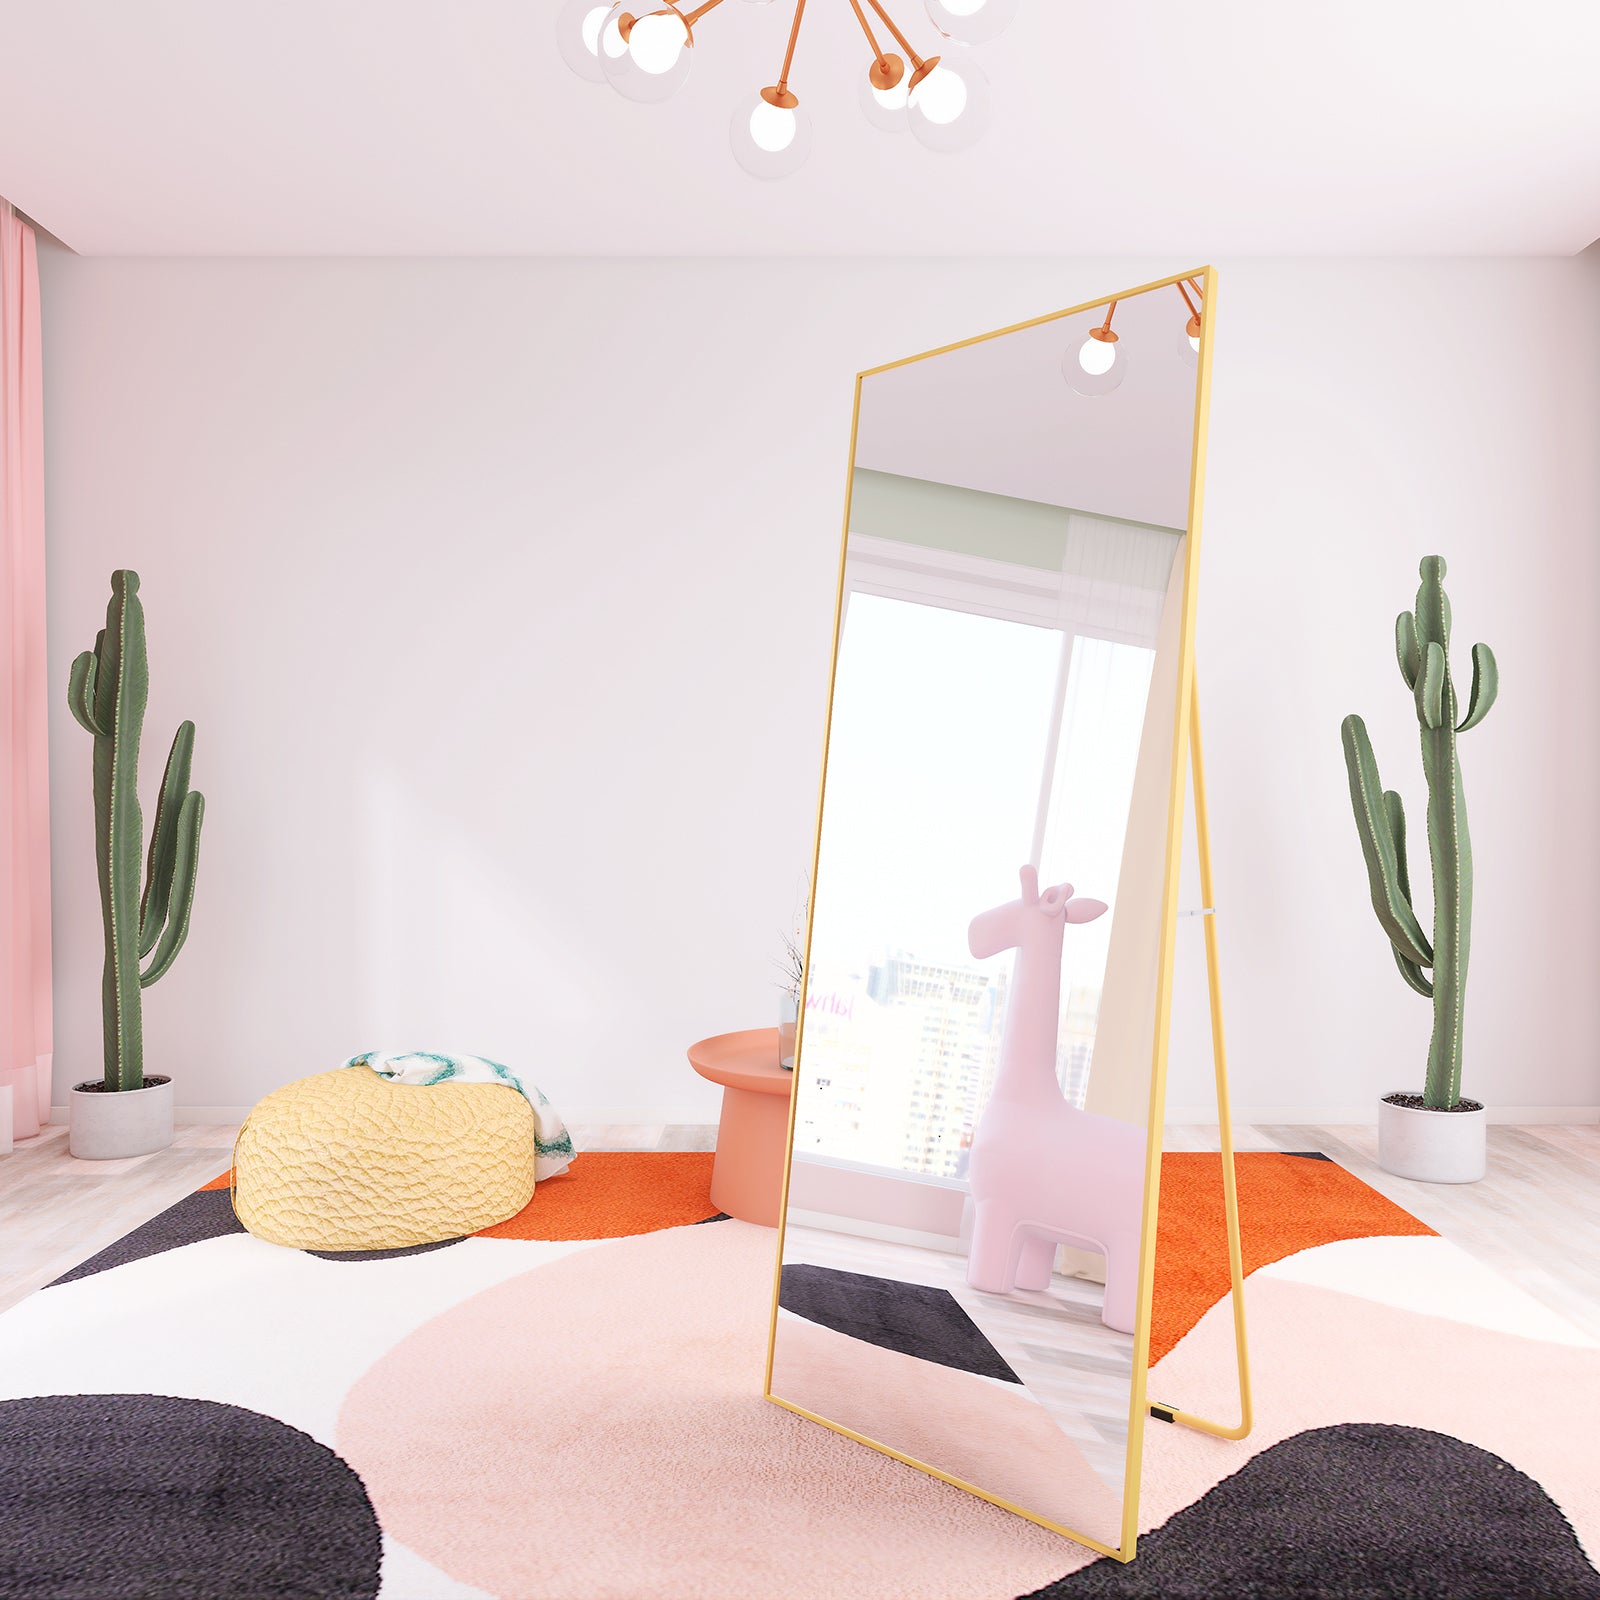 Full Length Mirror Hanging Standing or Leaning (Gold)